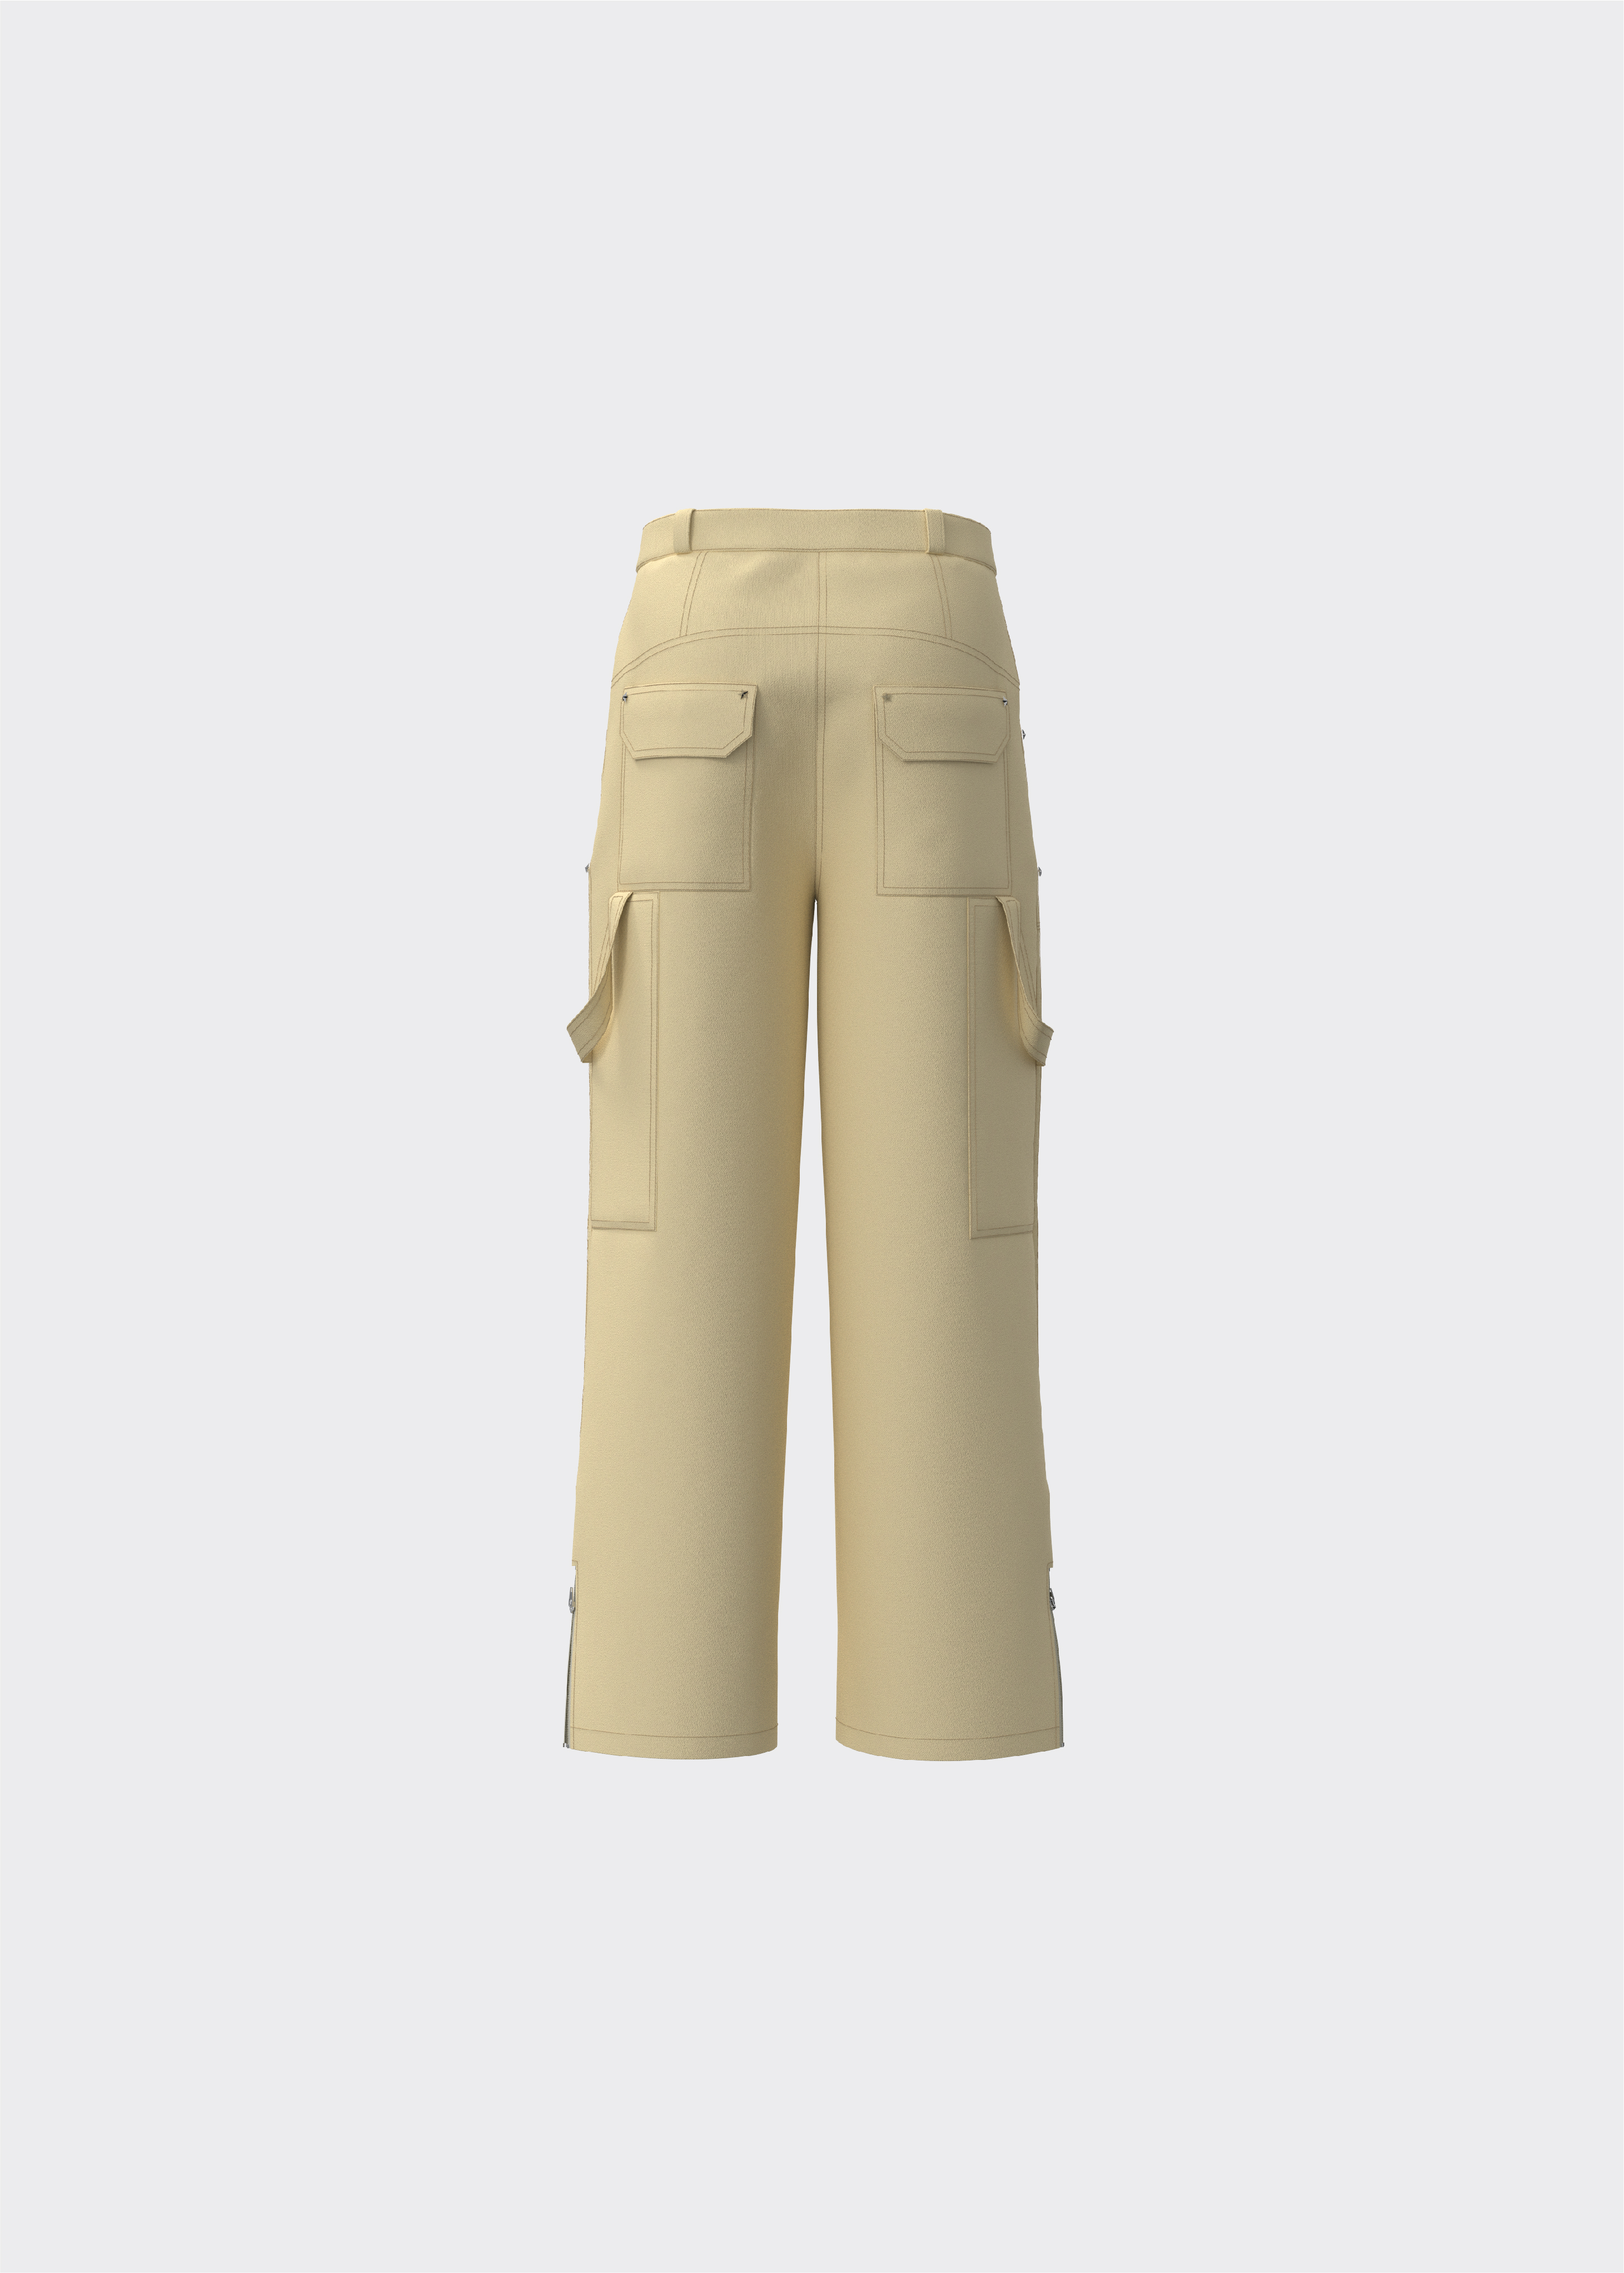 QUẦN DOUBLE KNEE CANVAS WORKWEAR